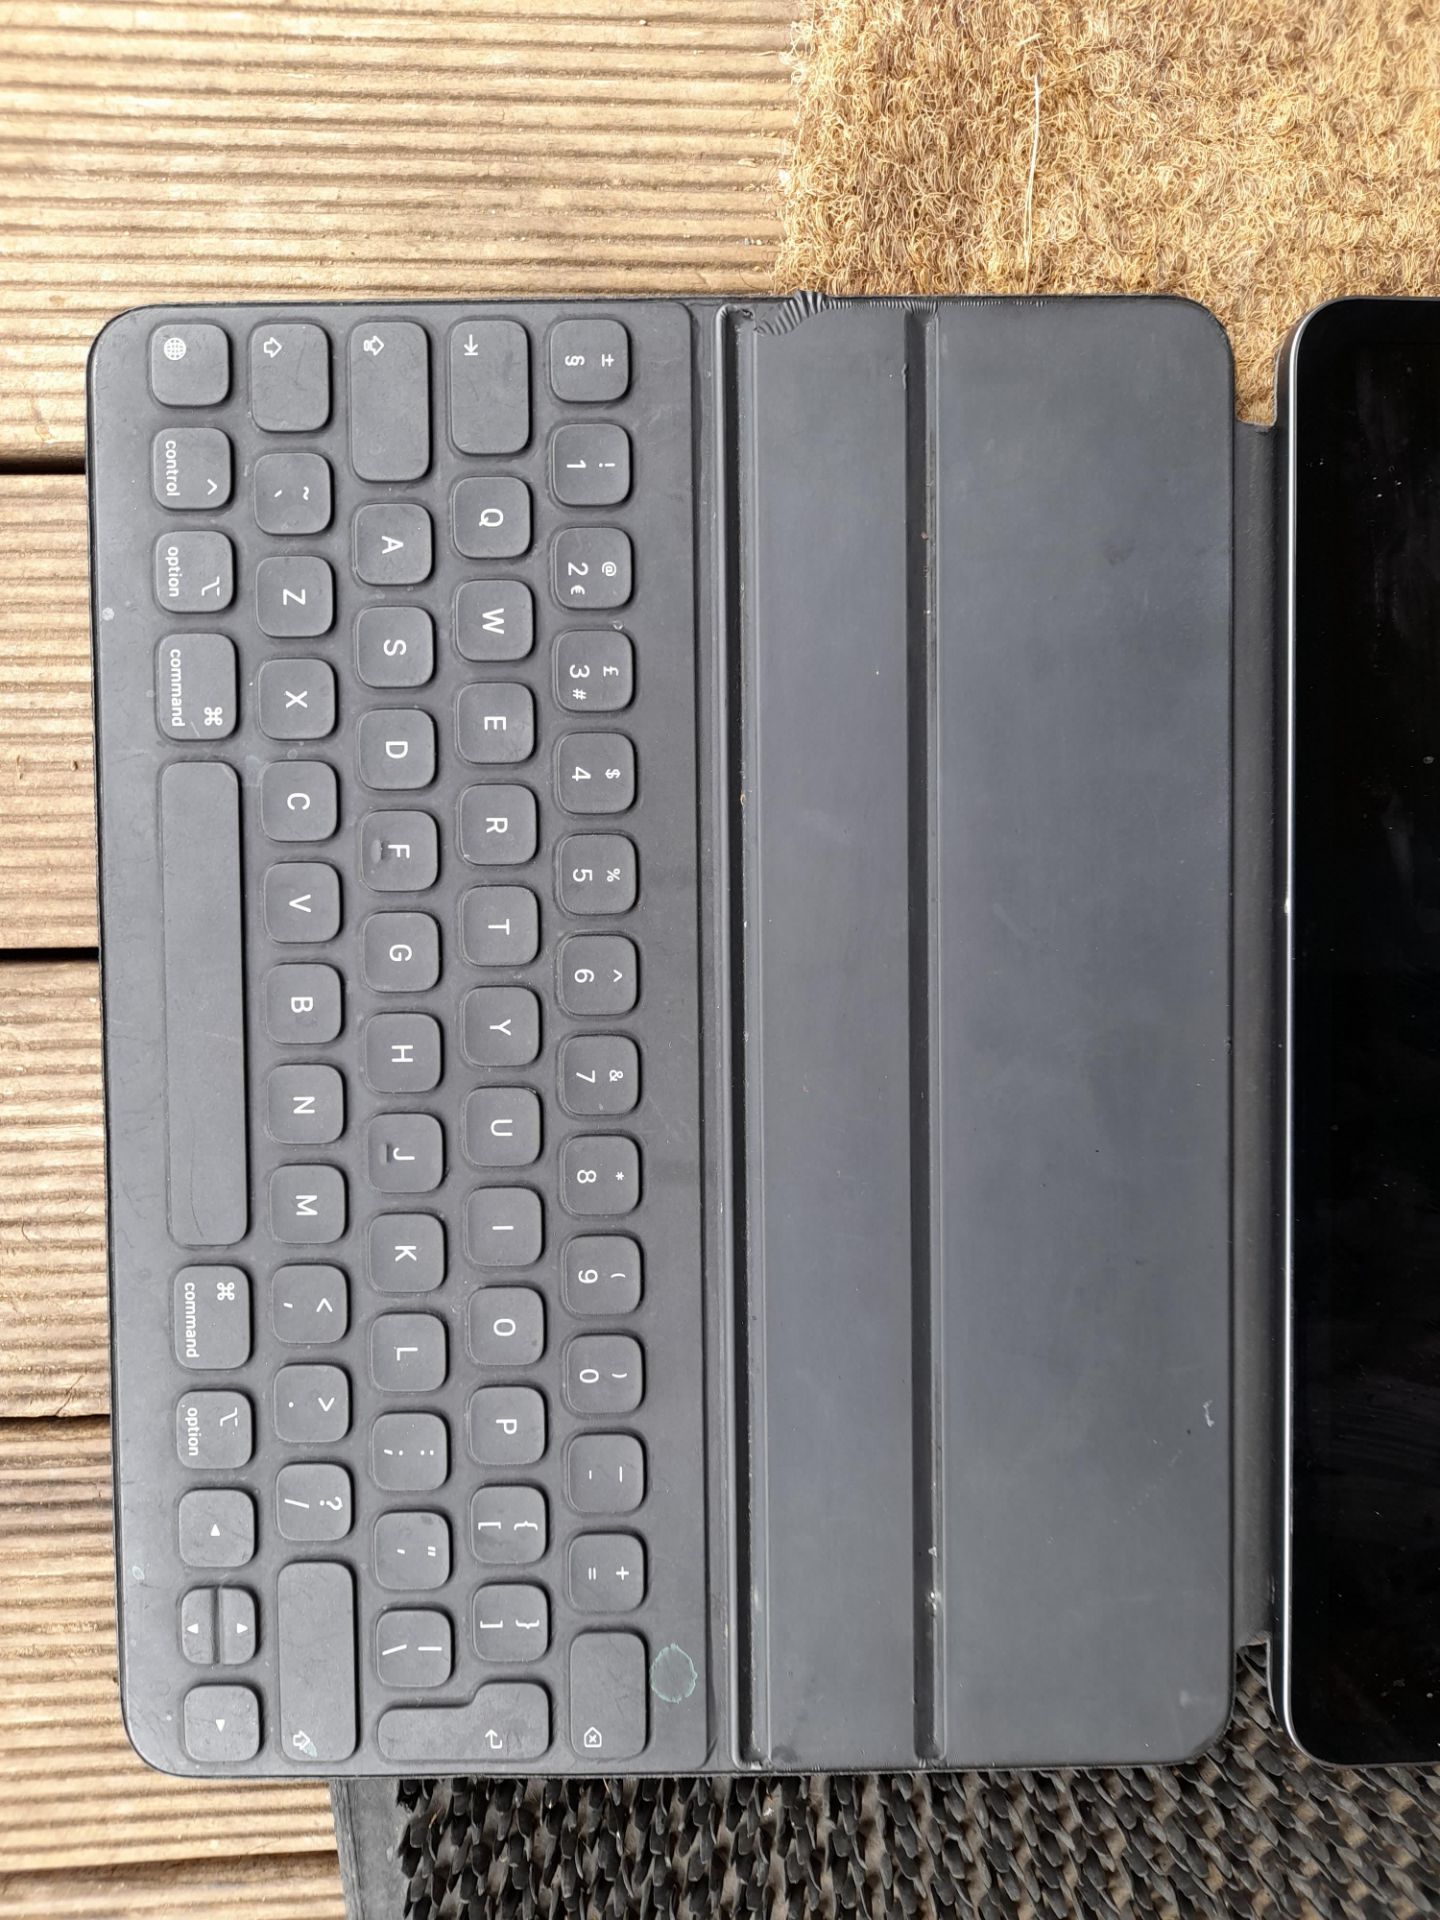 Apple iPad Pro 12.9” (4th Generation) Wi-Fi, Model A2229, with keyboard. No charger - Image 2 of 4